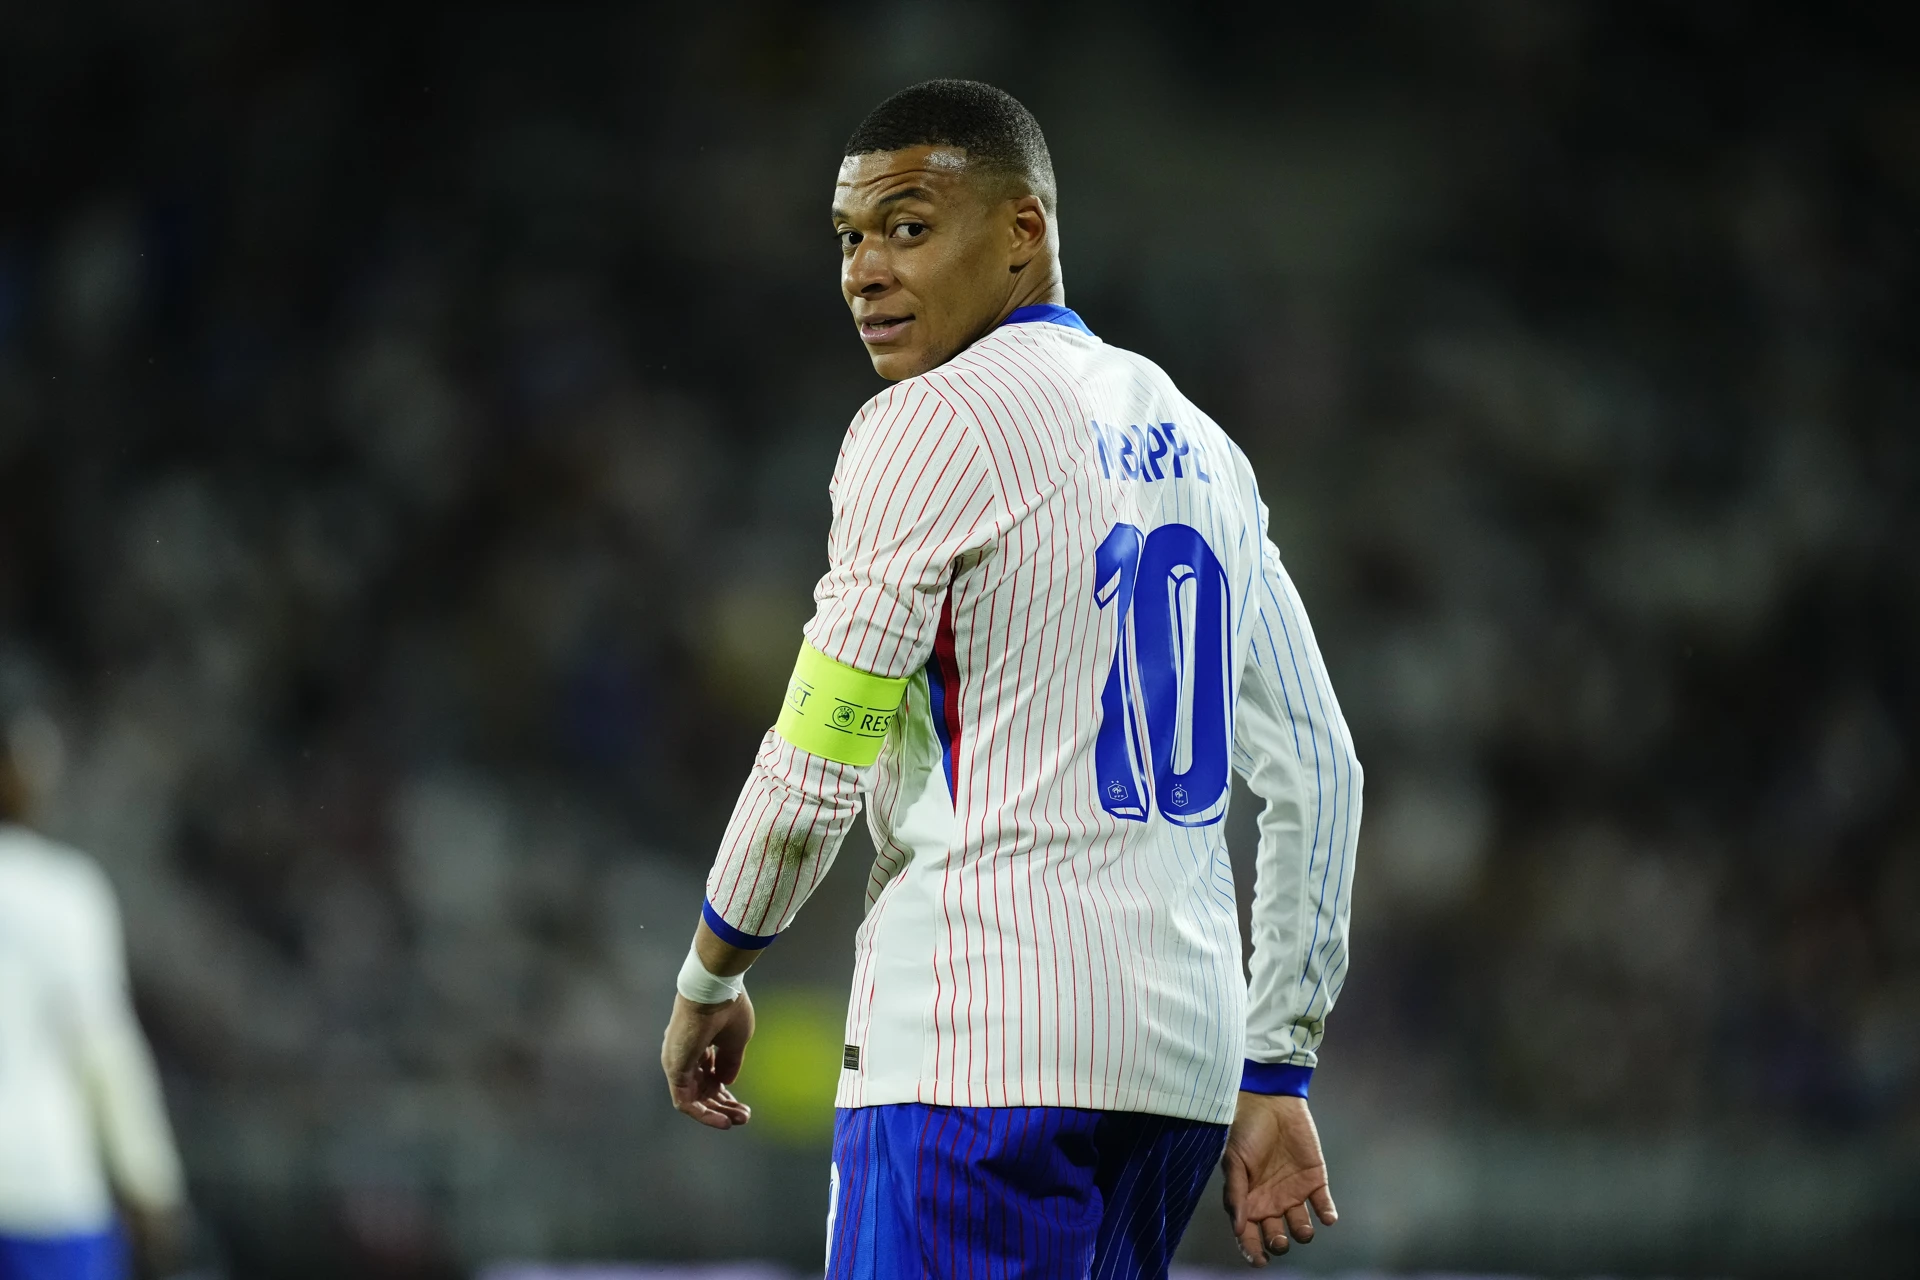 Injured Mbappe 'doing better every day' says France coach Deschamps